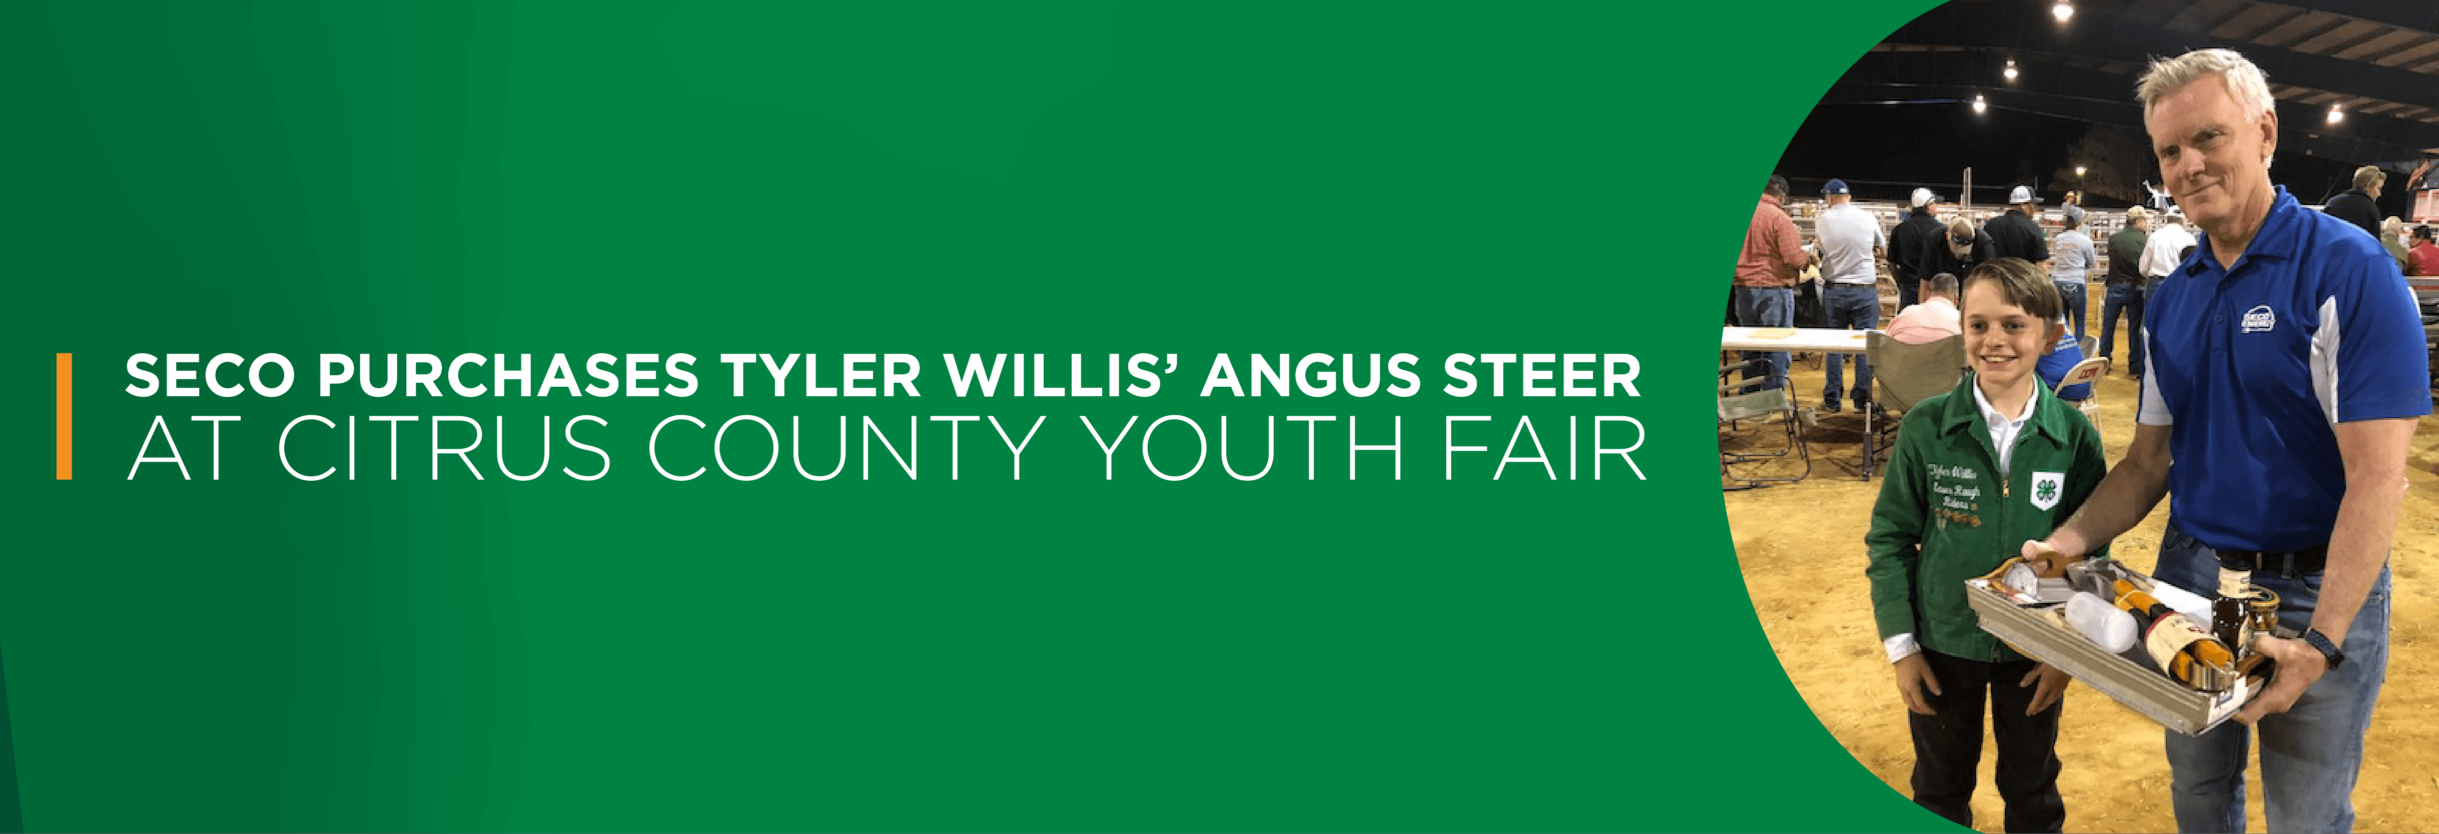 SECO Purchases Tyler Willis’ Angus Steer at Citrus County Youth Fair